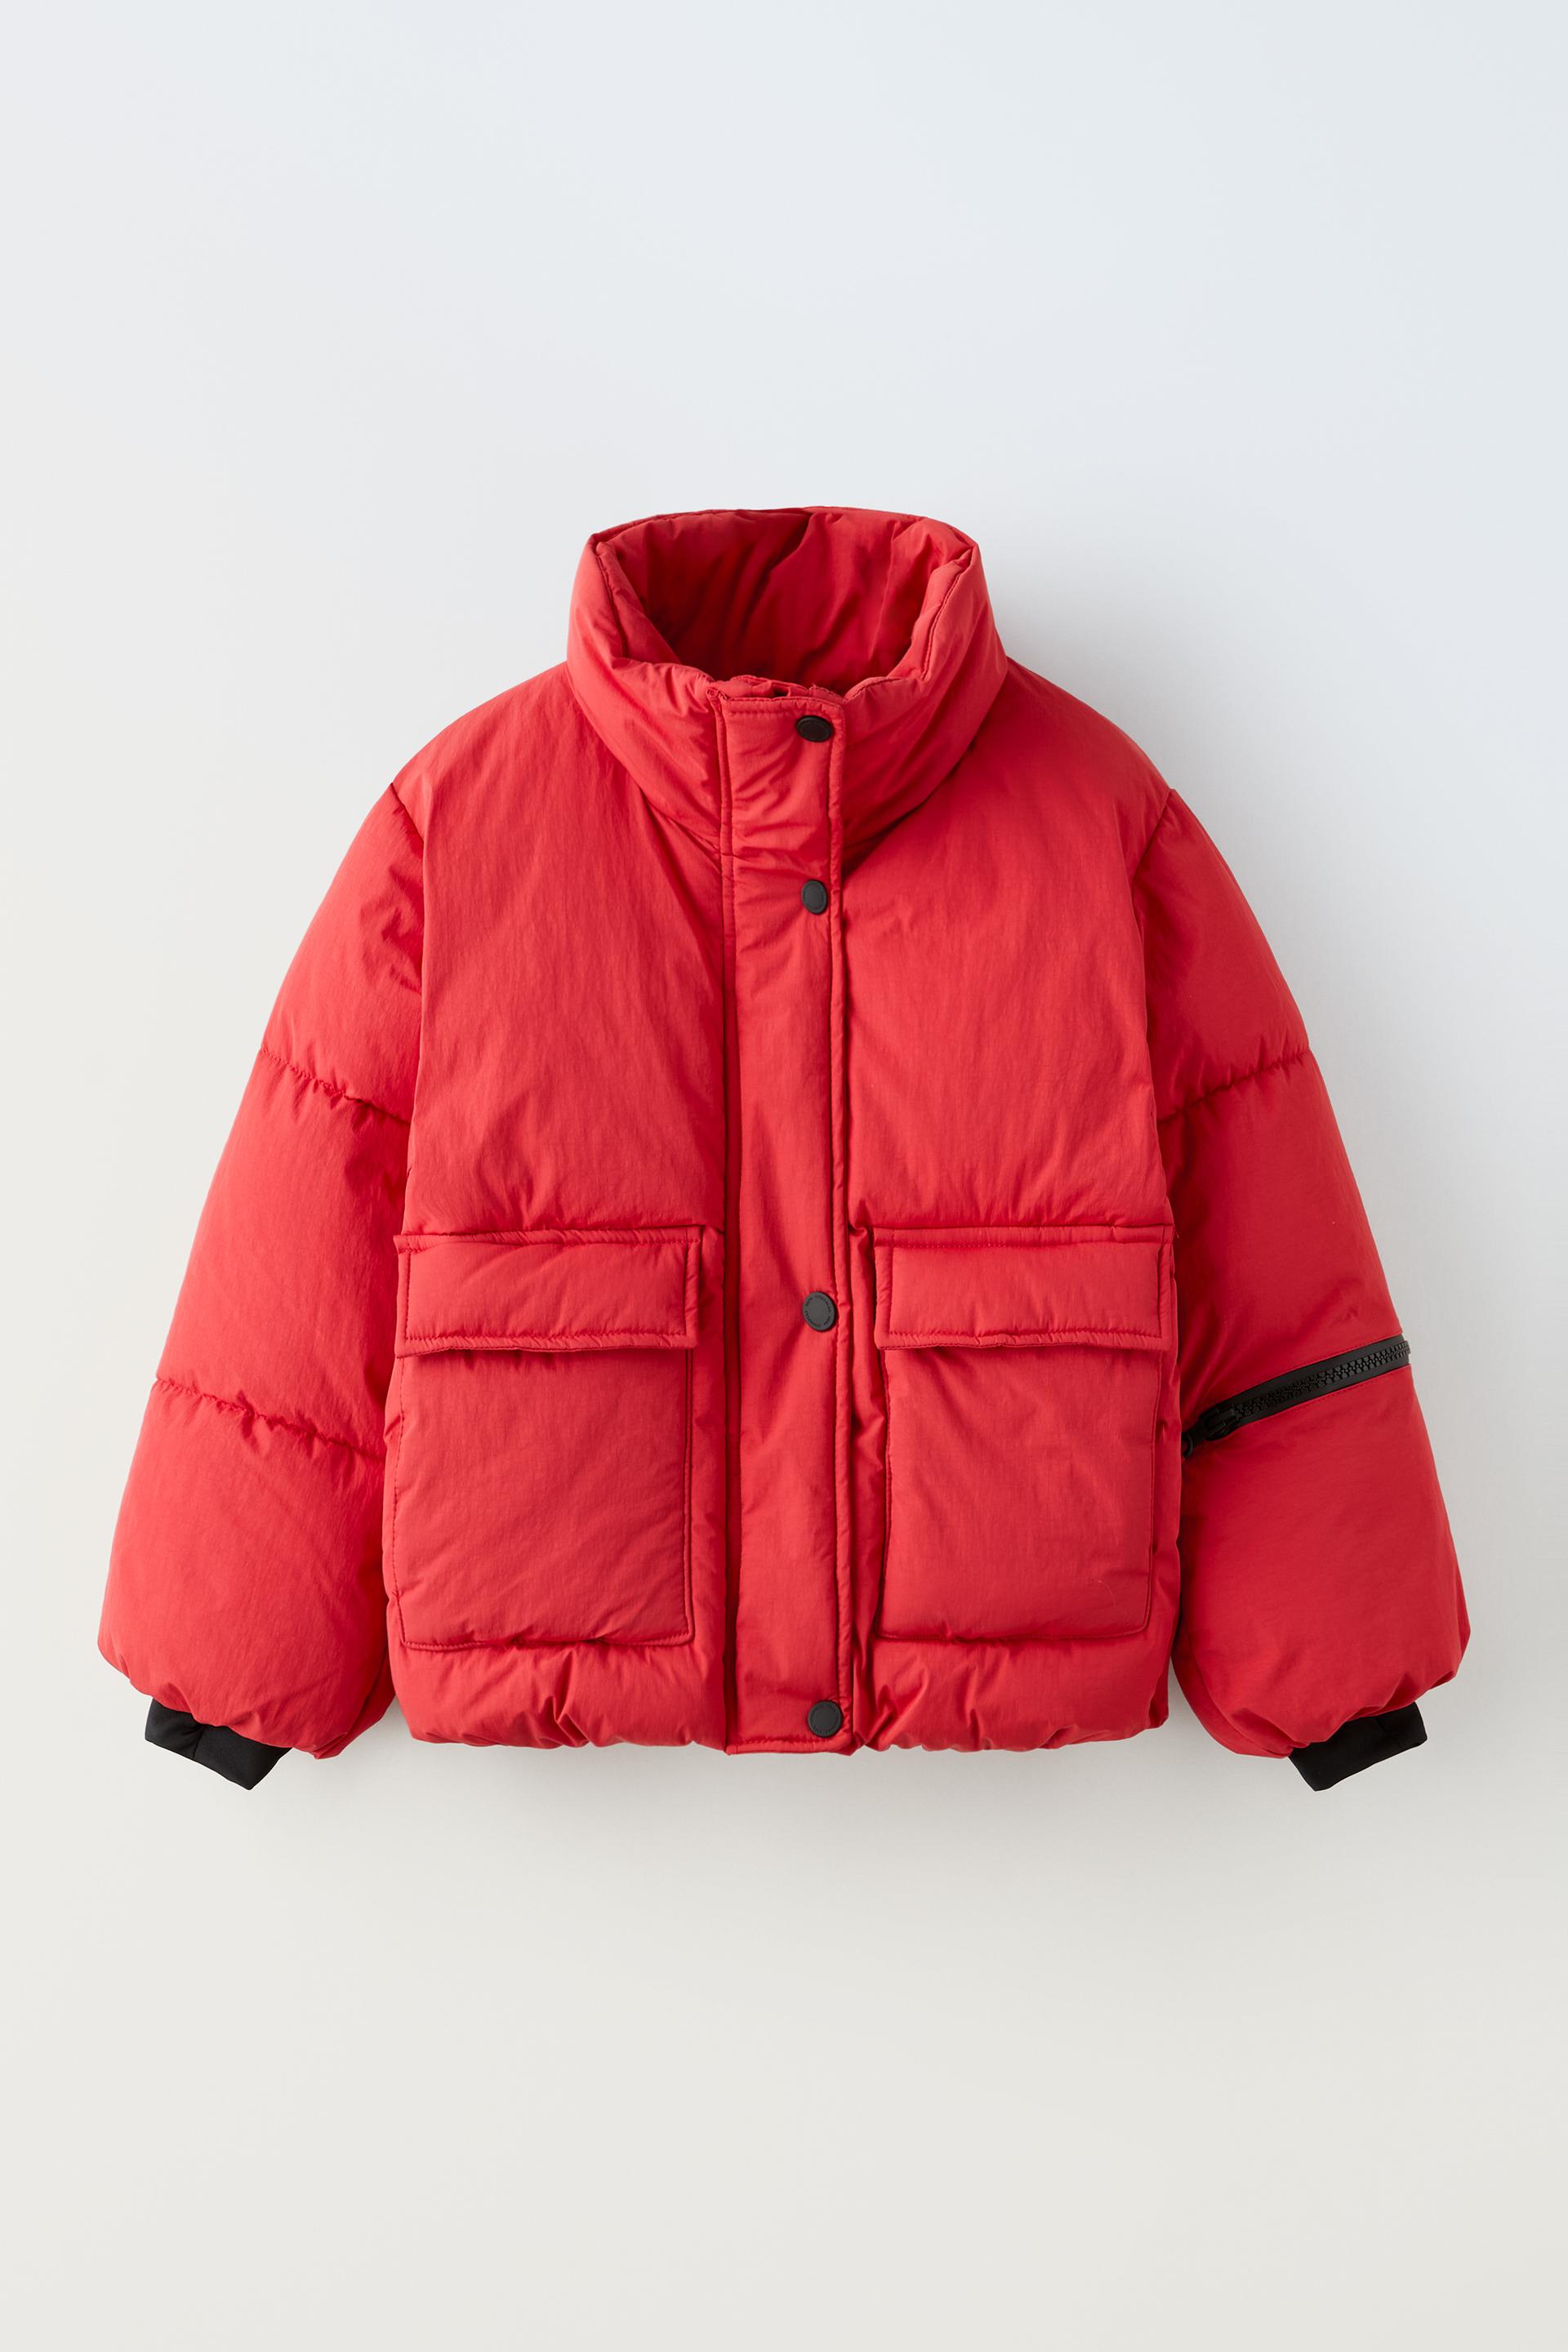 SNOW COLLECTION PUFFER JACKET - Red | ZARA United Kingdom